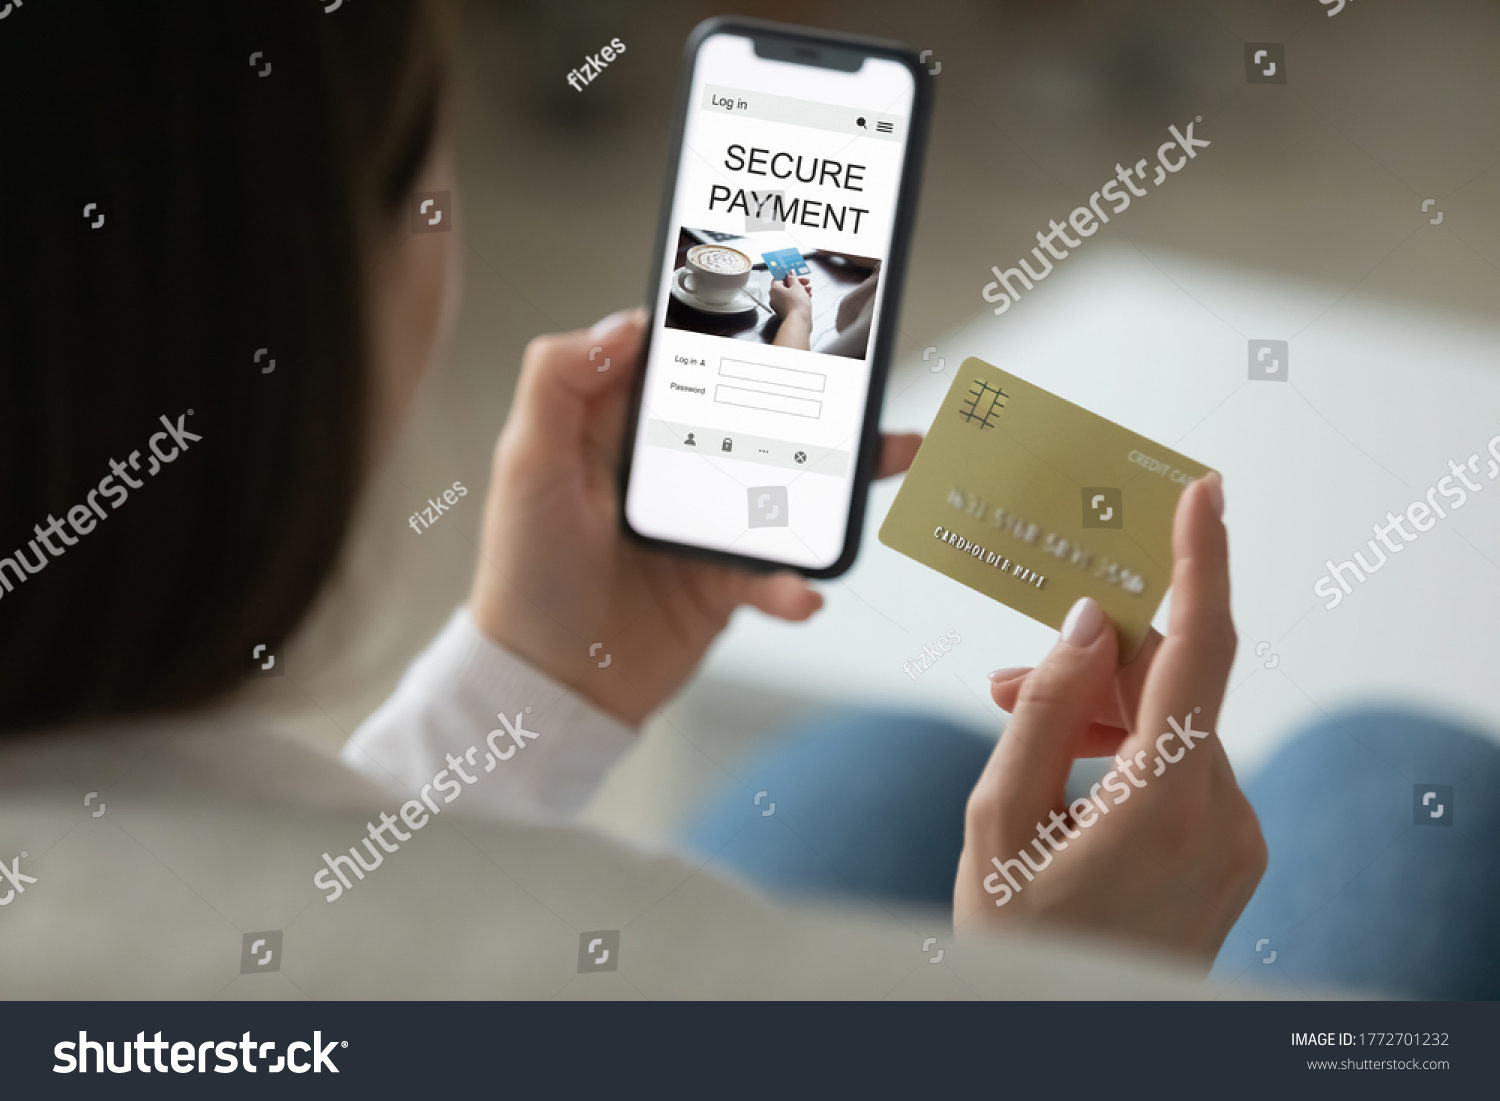 Close up back view of woman shopping online on smartphone using credit card, female enter Internet banking system on cellphone, make payment purchase on gadget, paying bills on web, screen mockup #1772701232